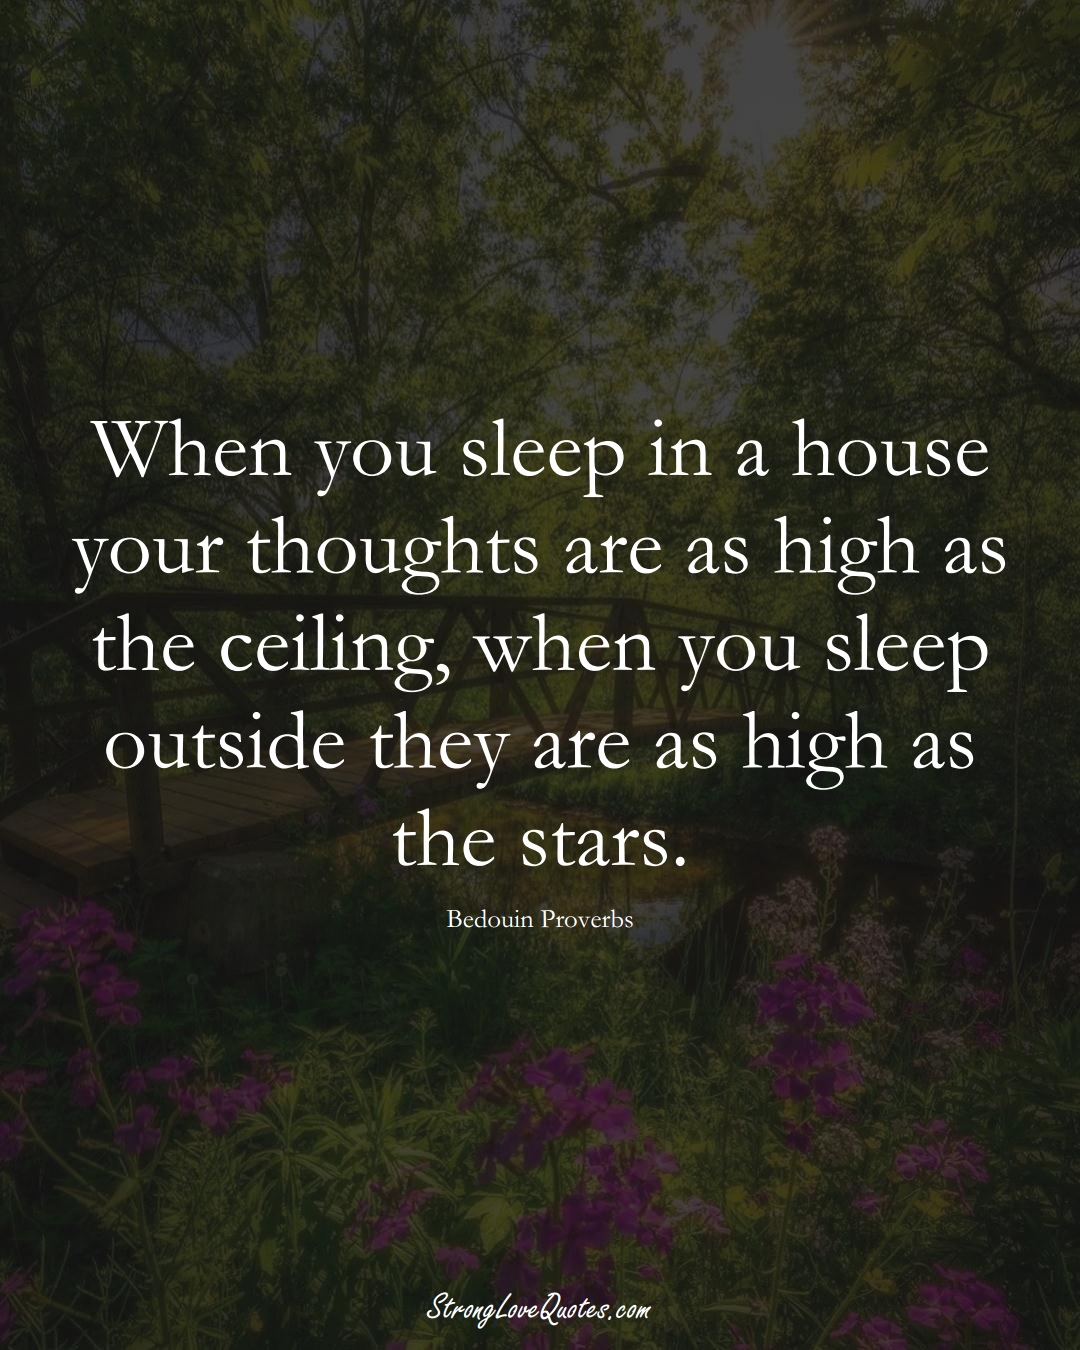 When you sleep in a house your thoughts are as high as the ceiling, when you sleep outside they are as high as the stars. (Bedouin Sayings);  #aVarietyofCulturesSayings